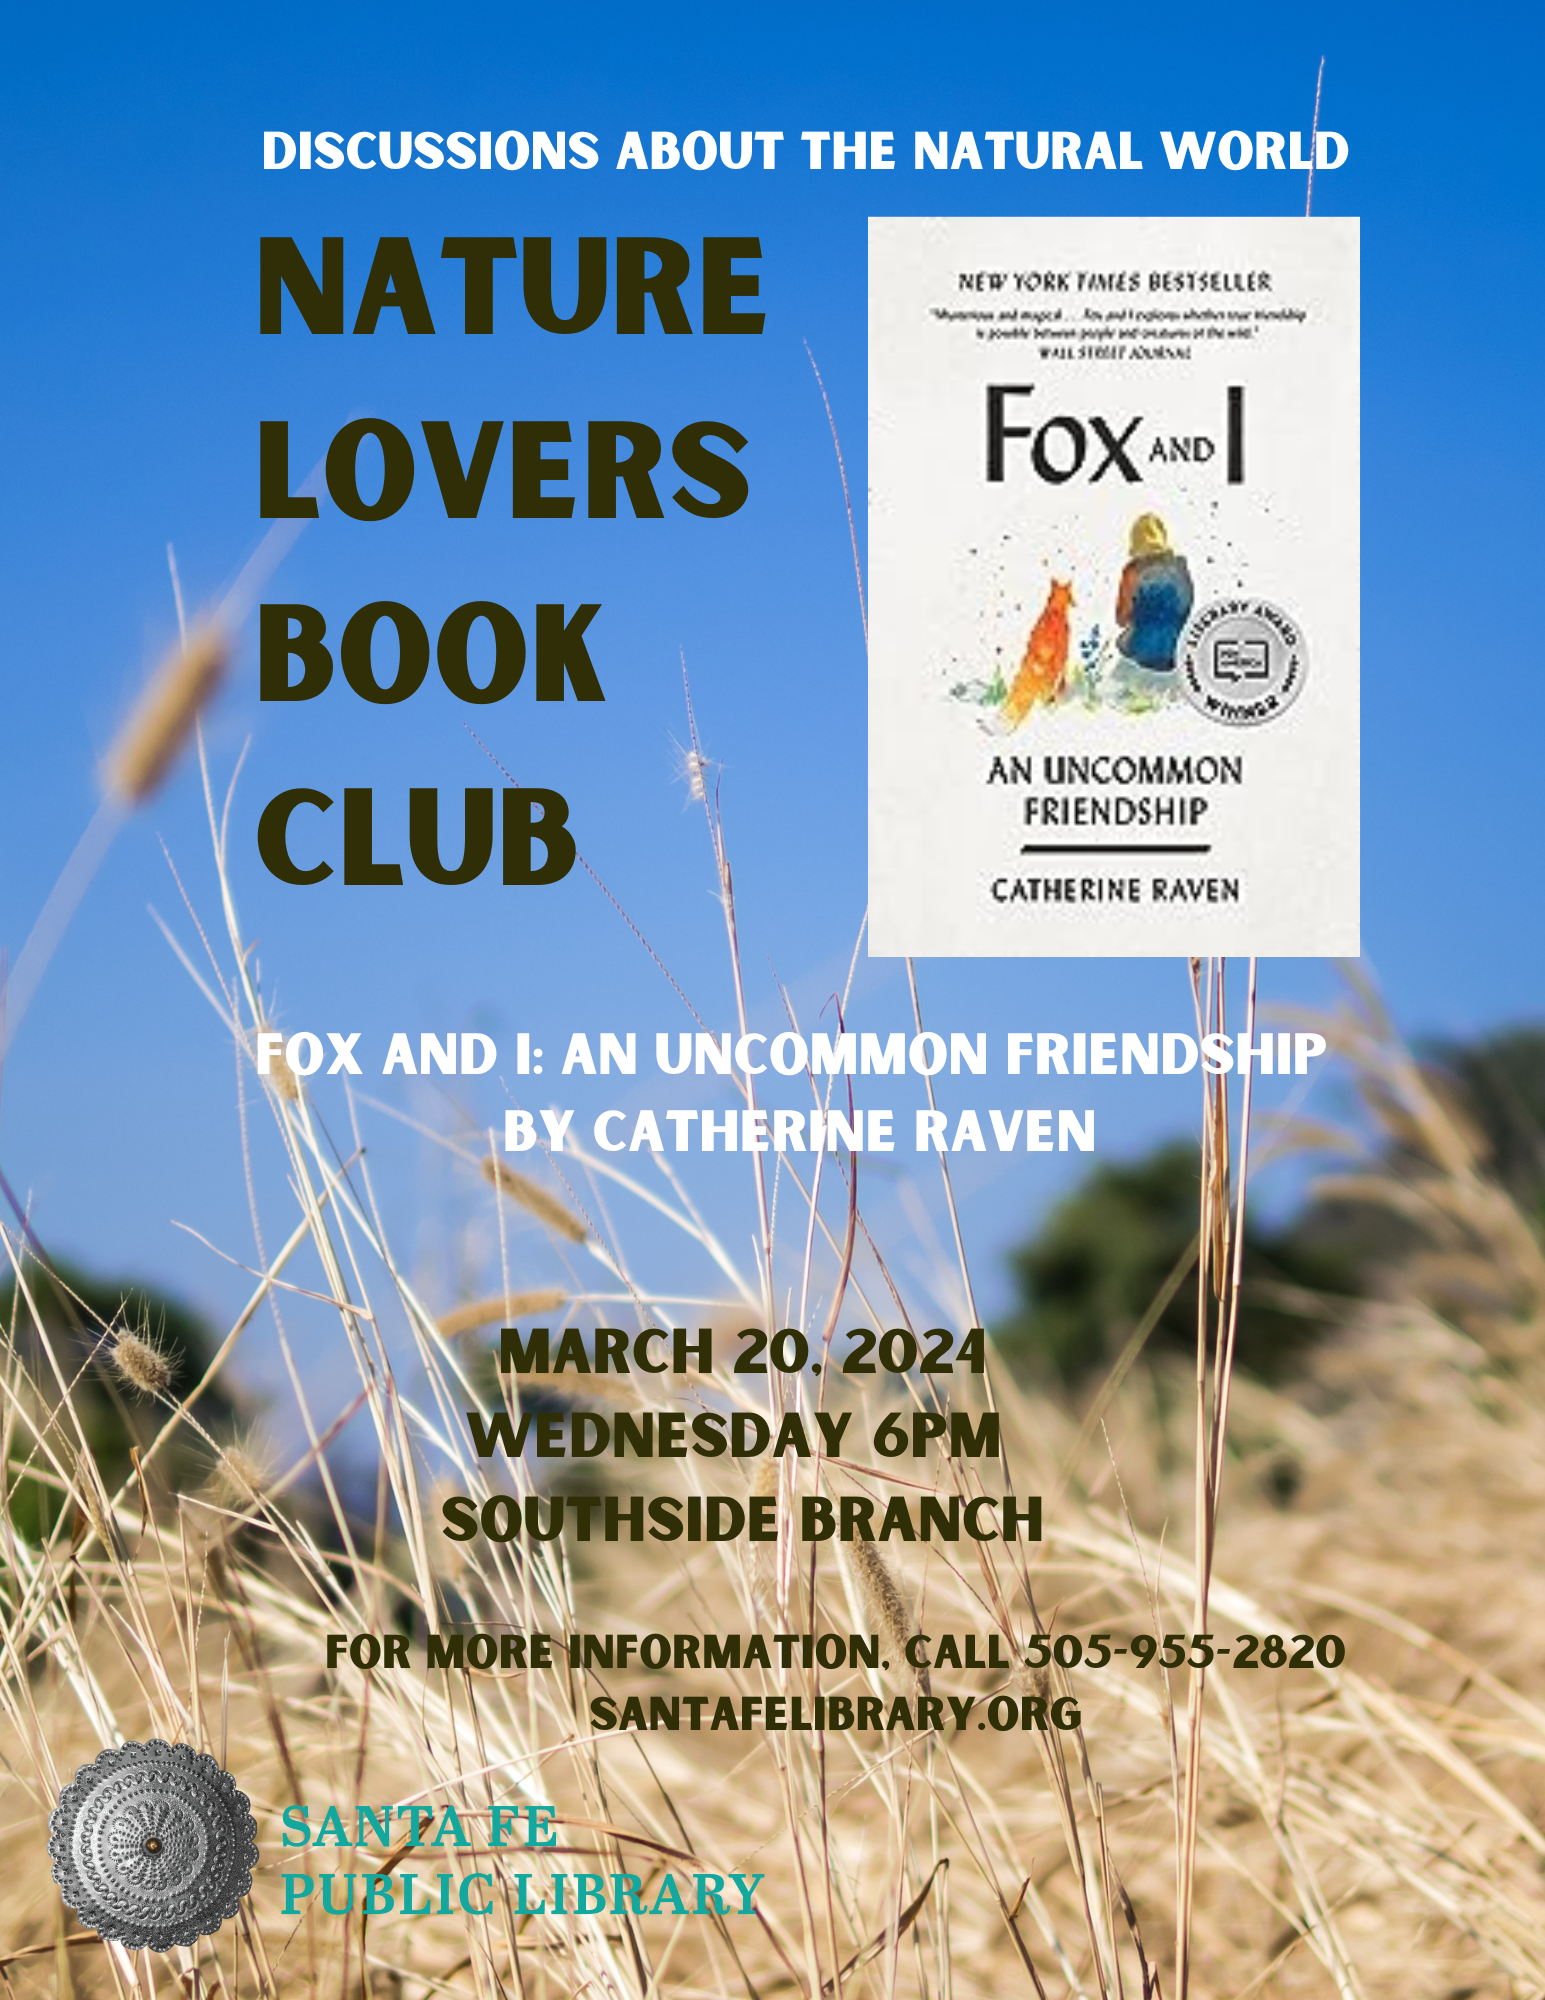 Nature Lovers Book Club discusses Fox and I by Catherine Raven